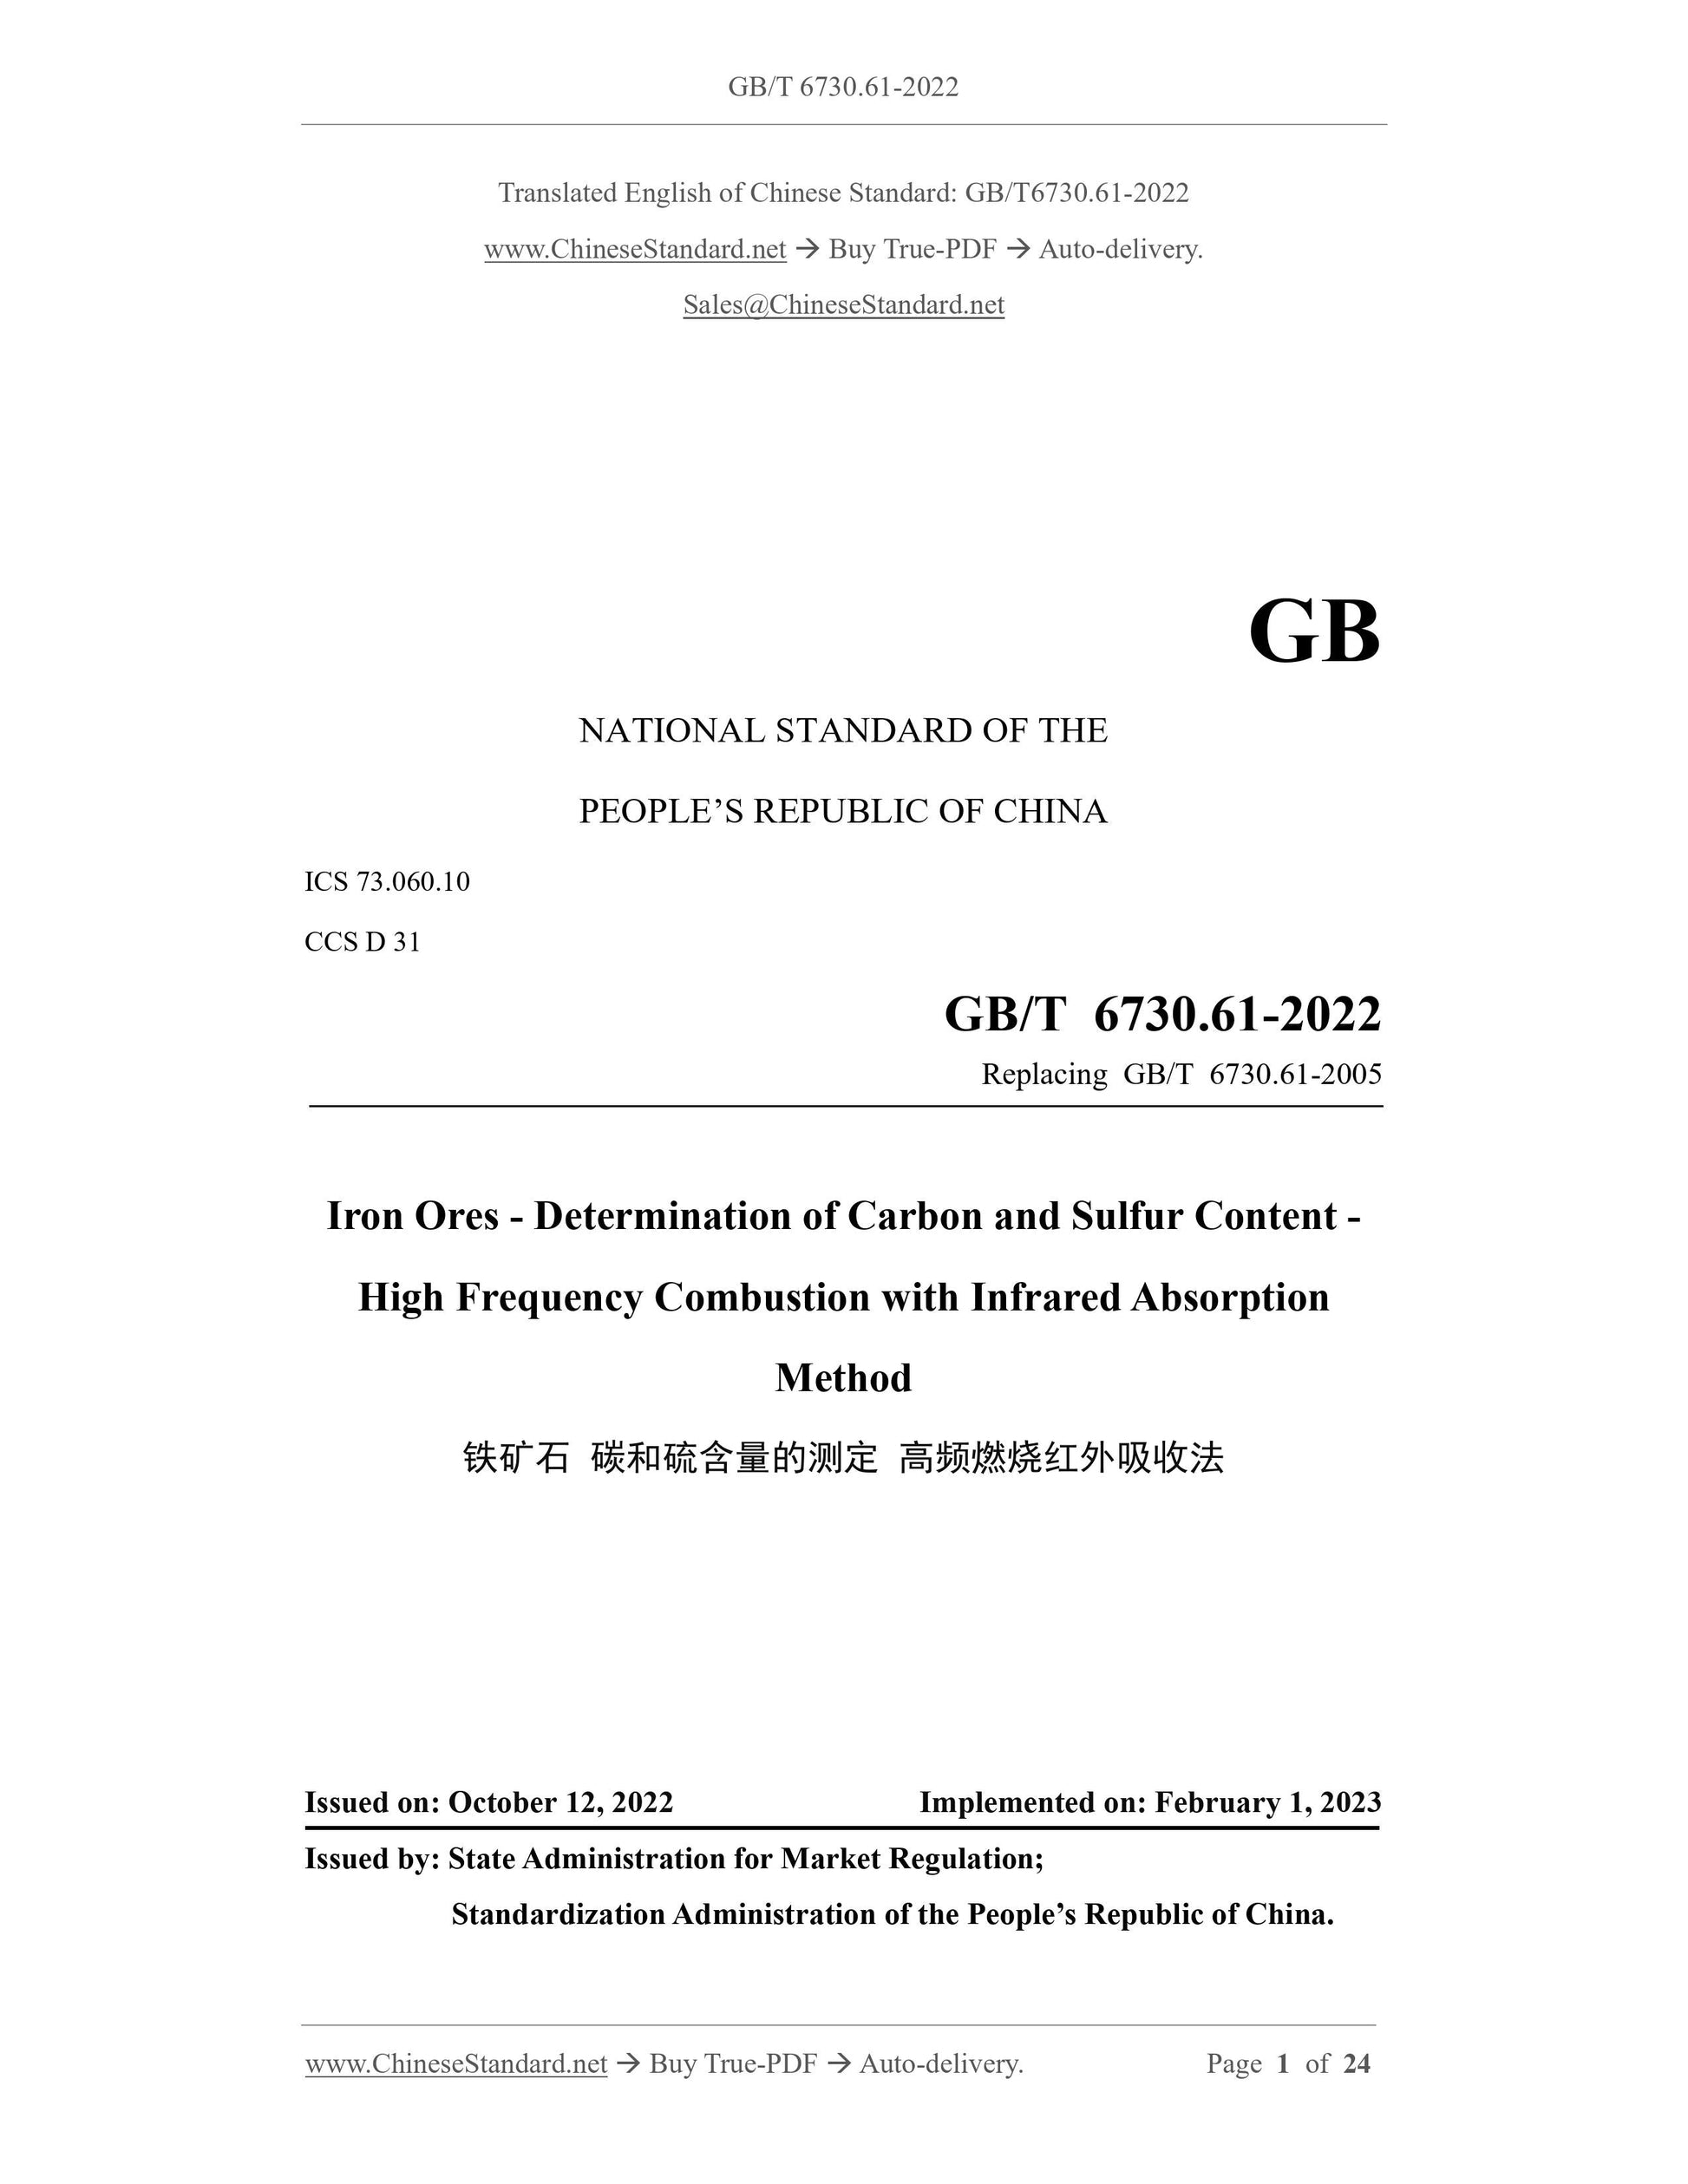 GB/T 6730.61-2022 Page 1